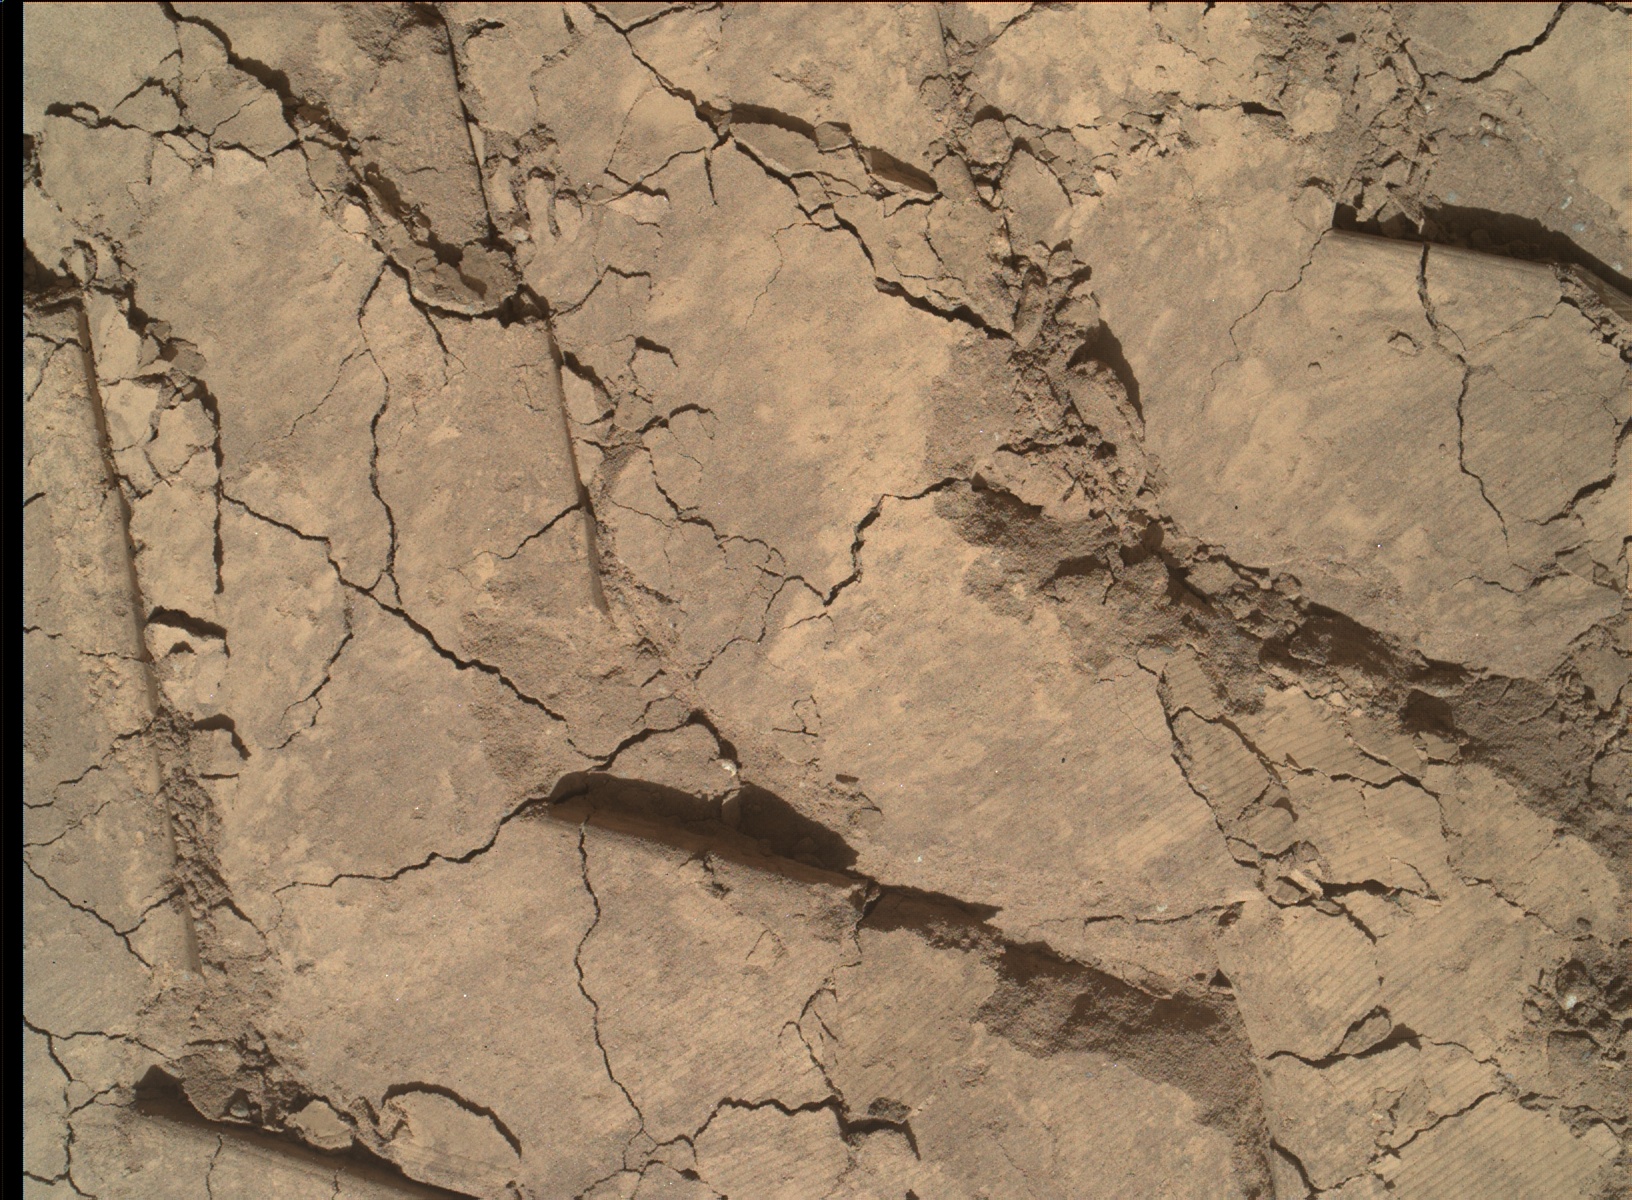 Nasa's Mars rover Curiosity acquired this image using its Mars Hand Lens Imager (MAHLI) on Sol 531, at drive 184, site number 26